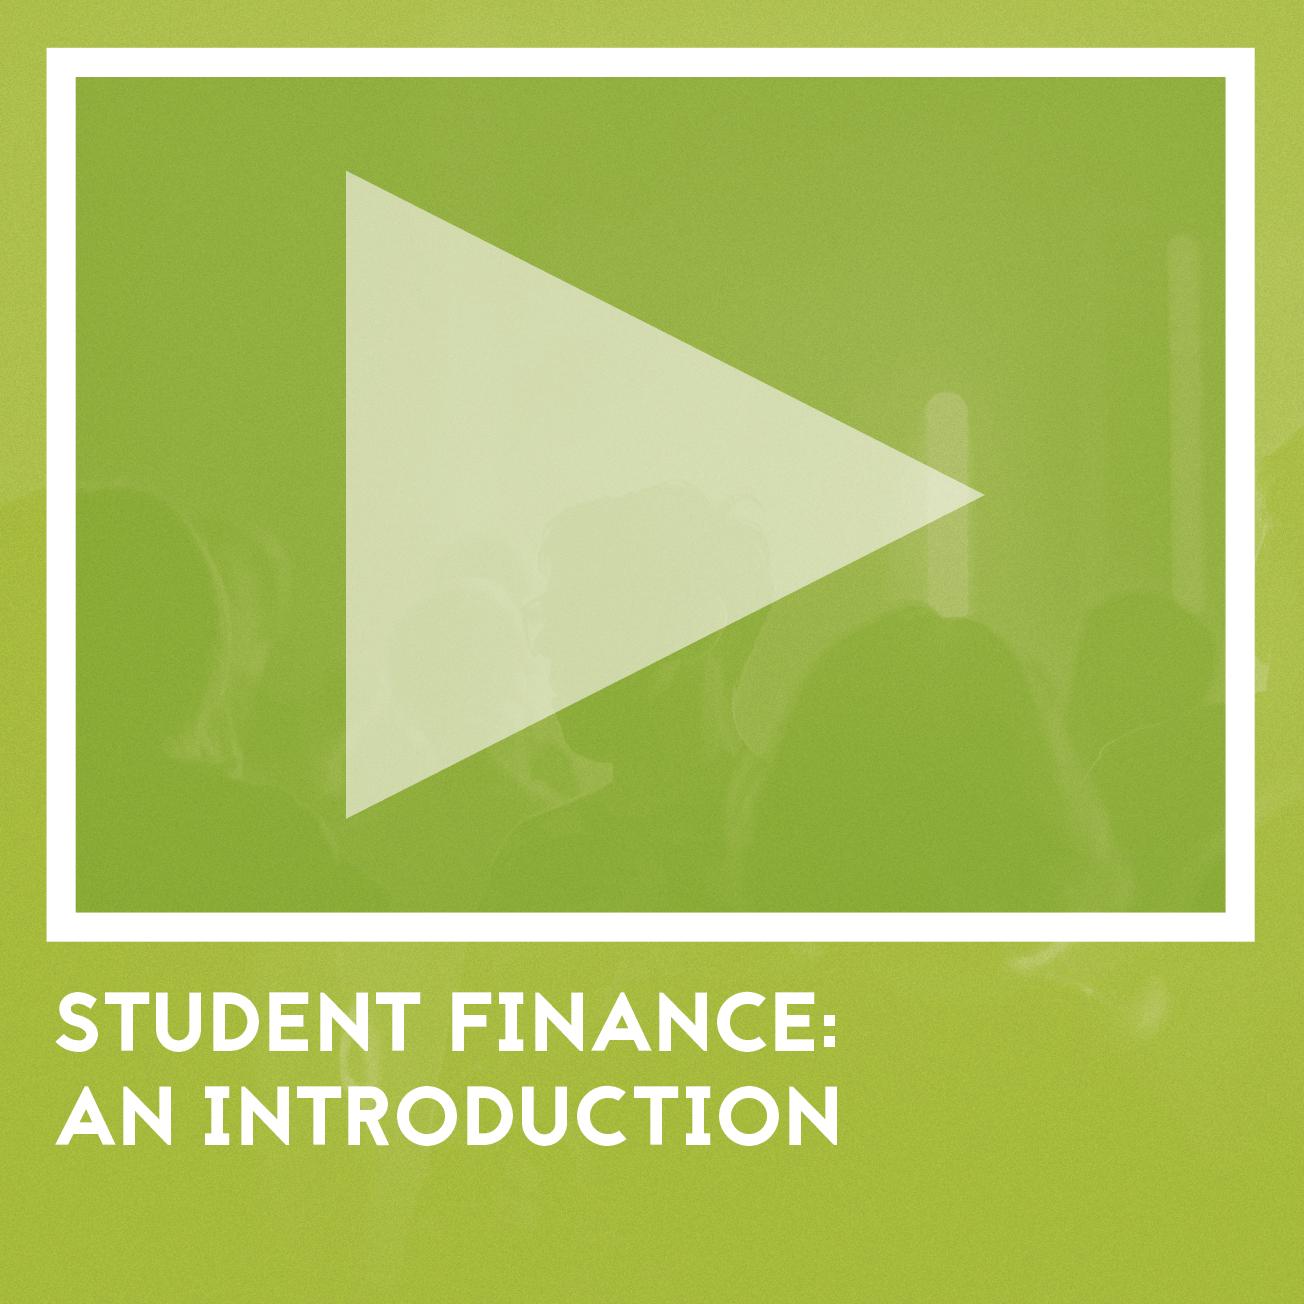 Student finance, an introduction